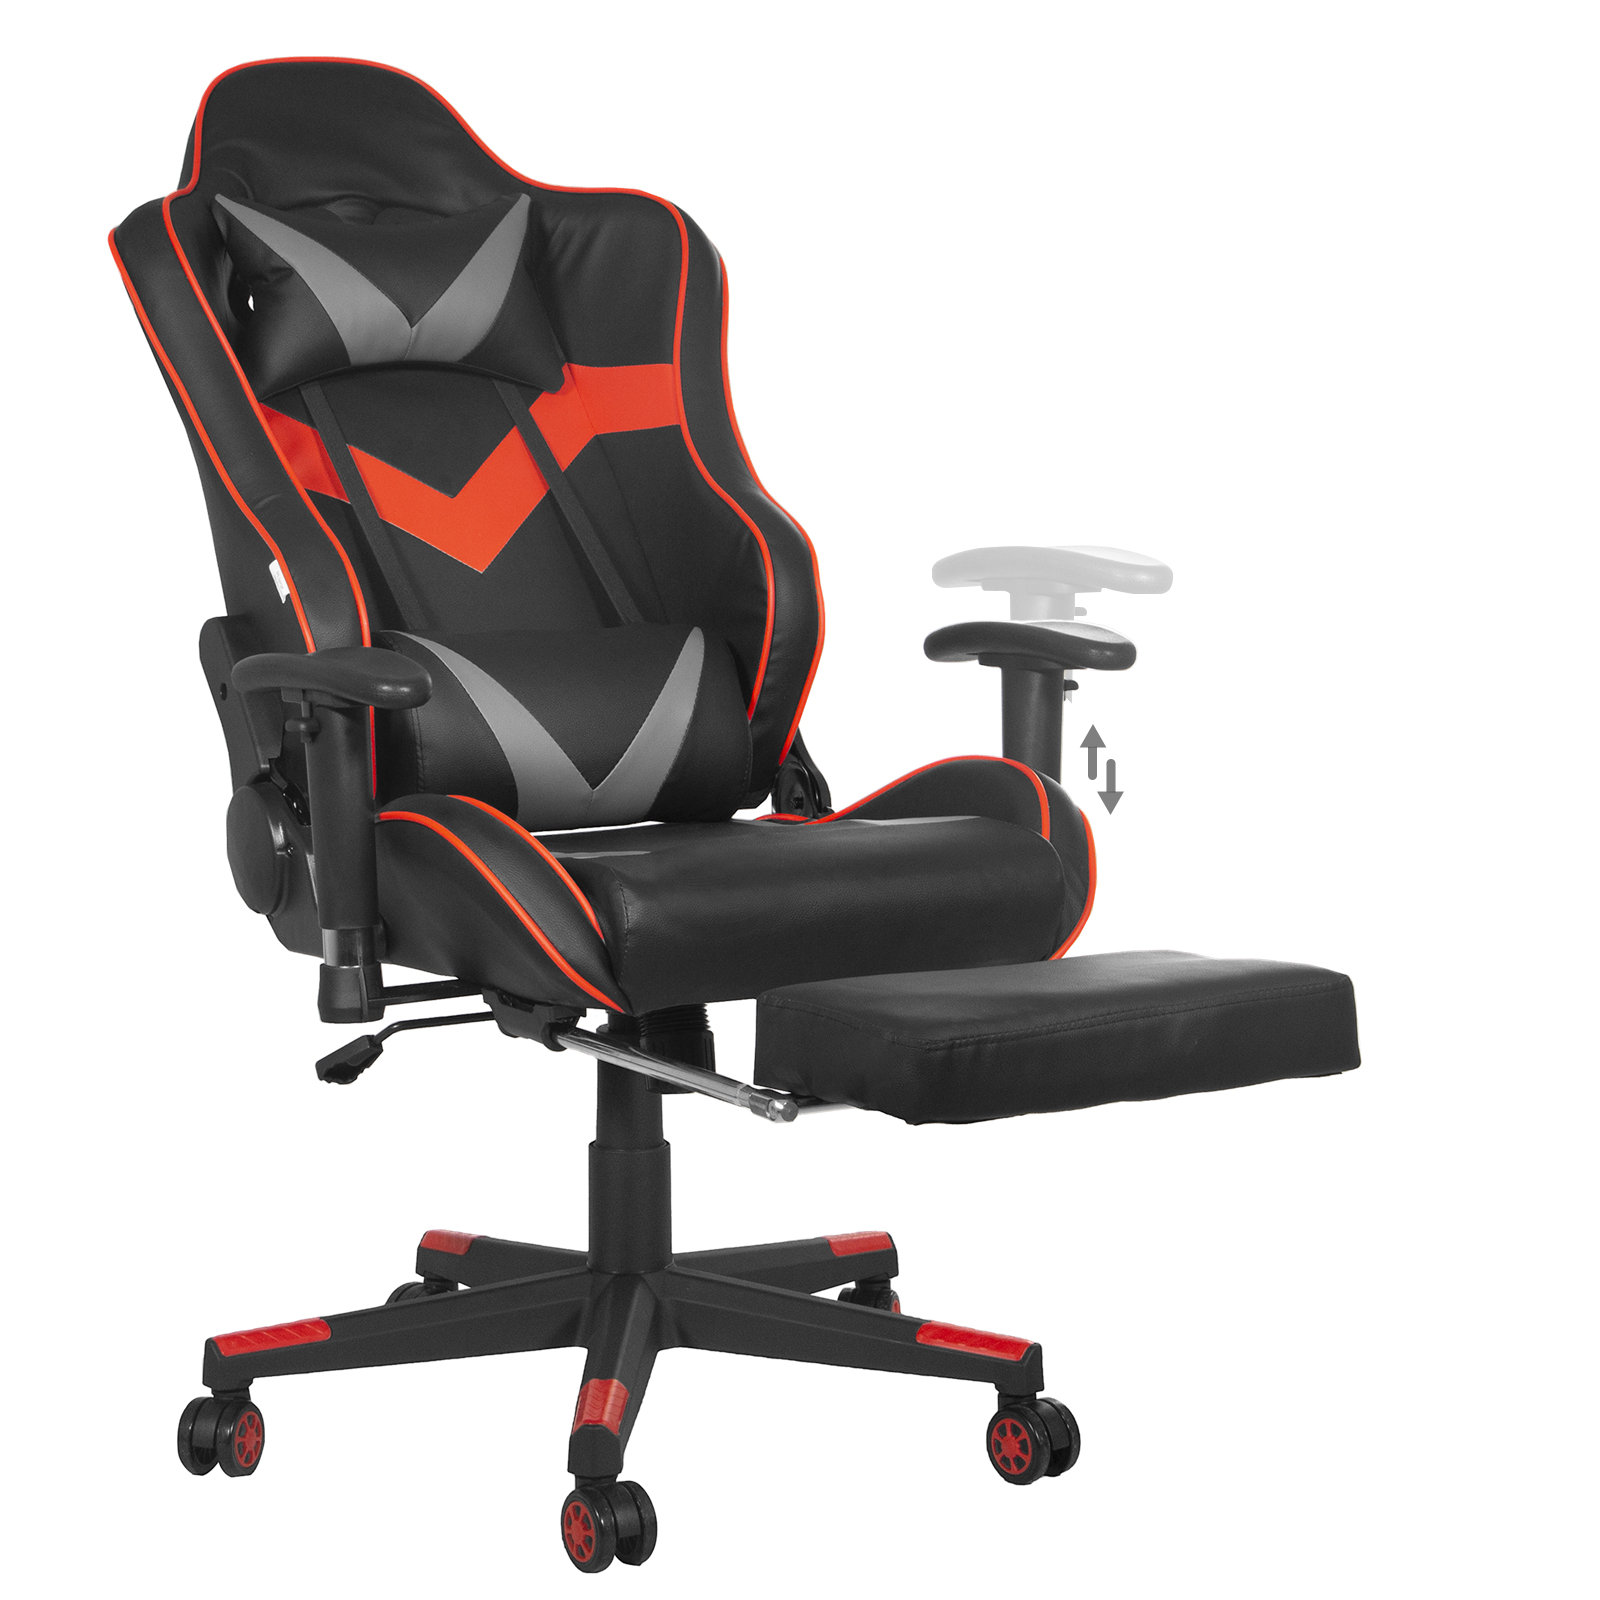  Furmax Gaming Chair, Video Game Chair with Footrest